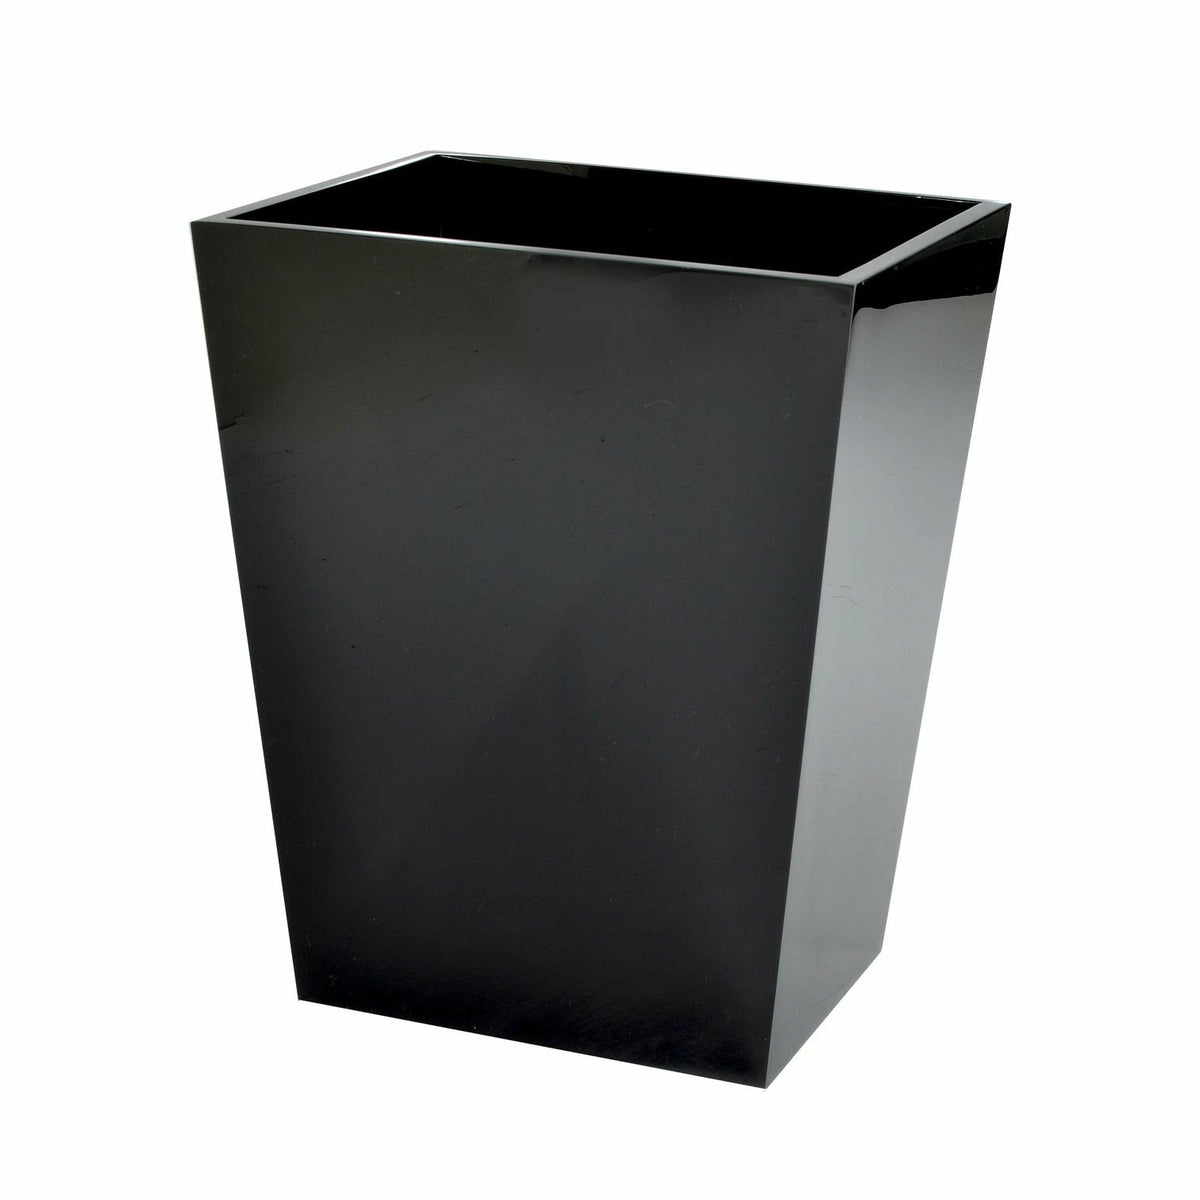 Mike and Ally Ice Lucite Bath Accessories Wastebasket Black